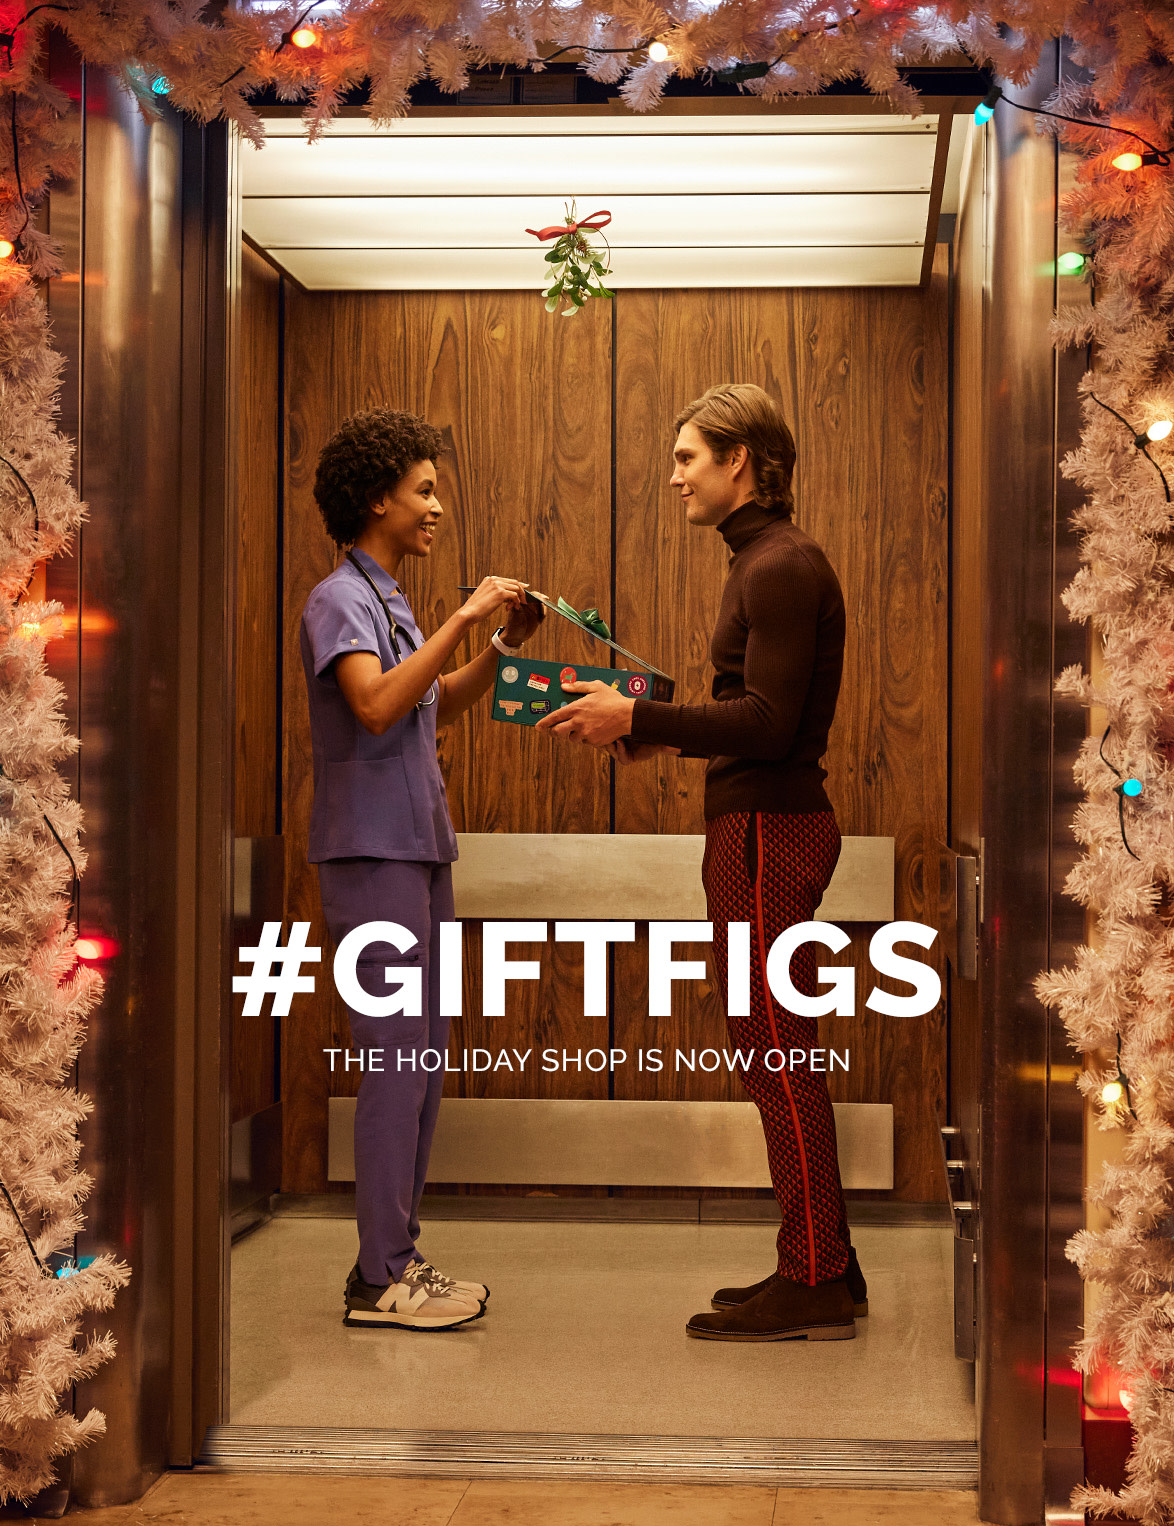 THE #GIFTFIGS SHOP IS OPEN! Featuring holiday newness and all the best gifts for the Awesome Humans who give the most.